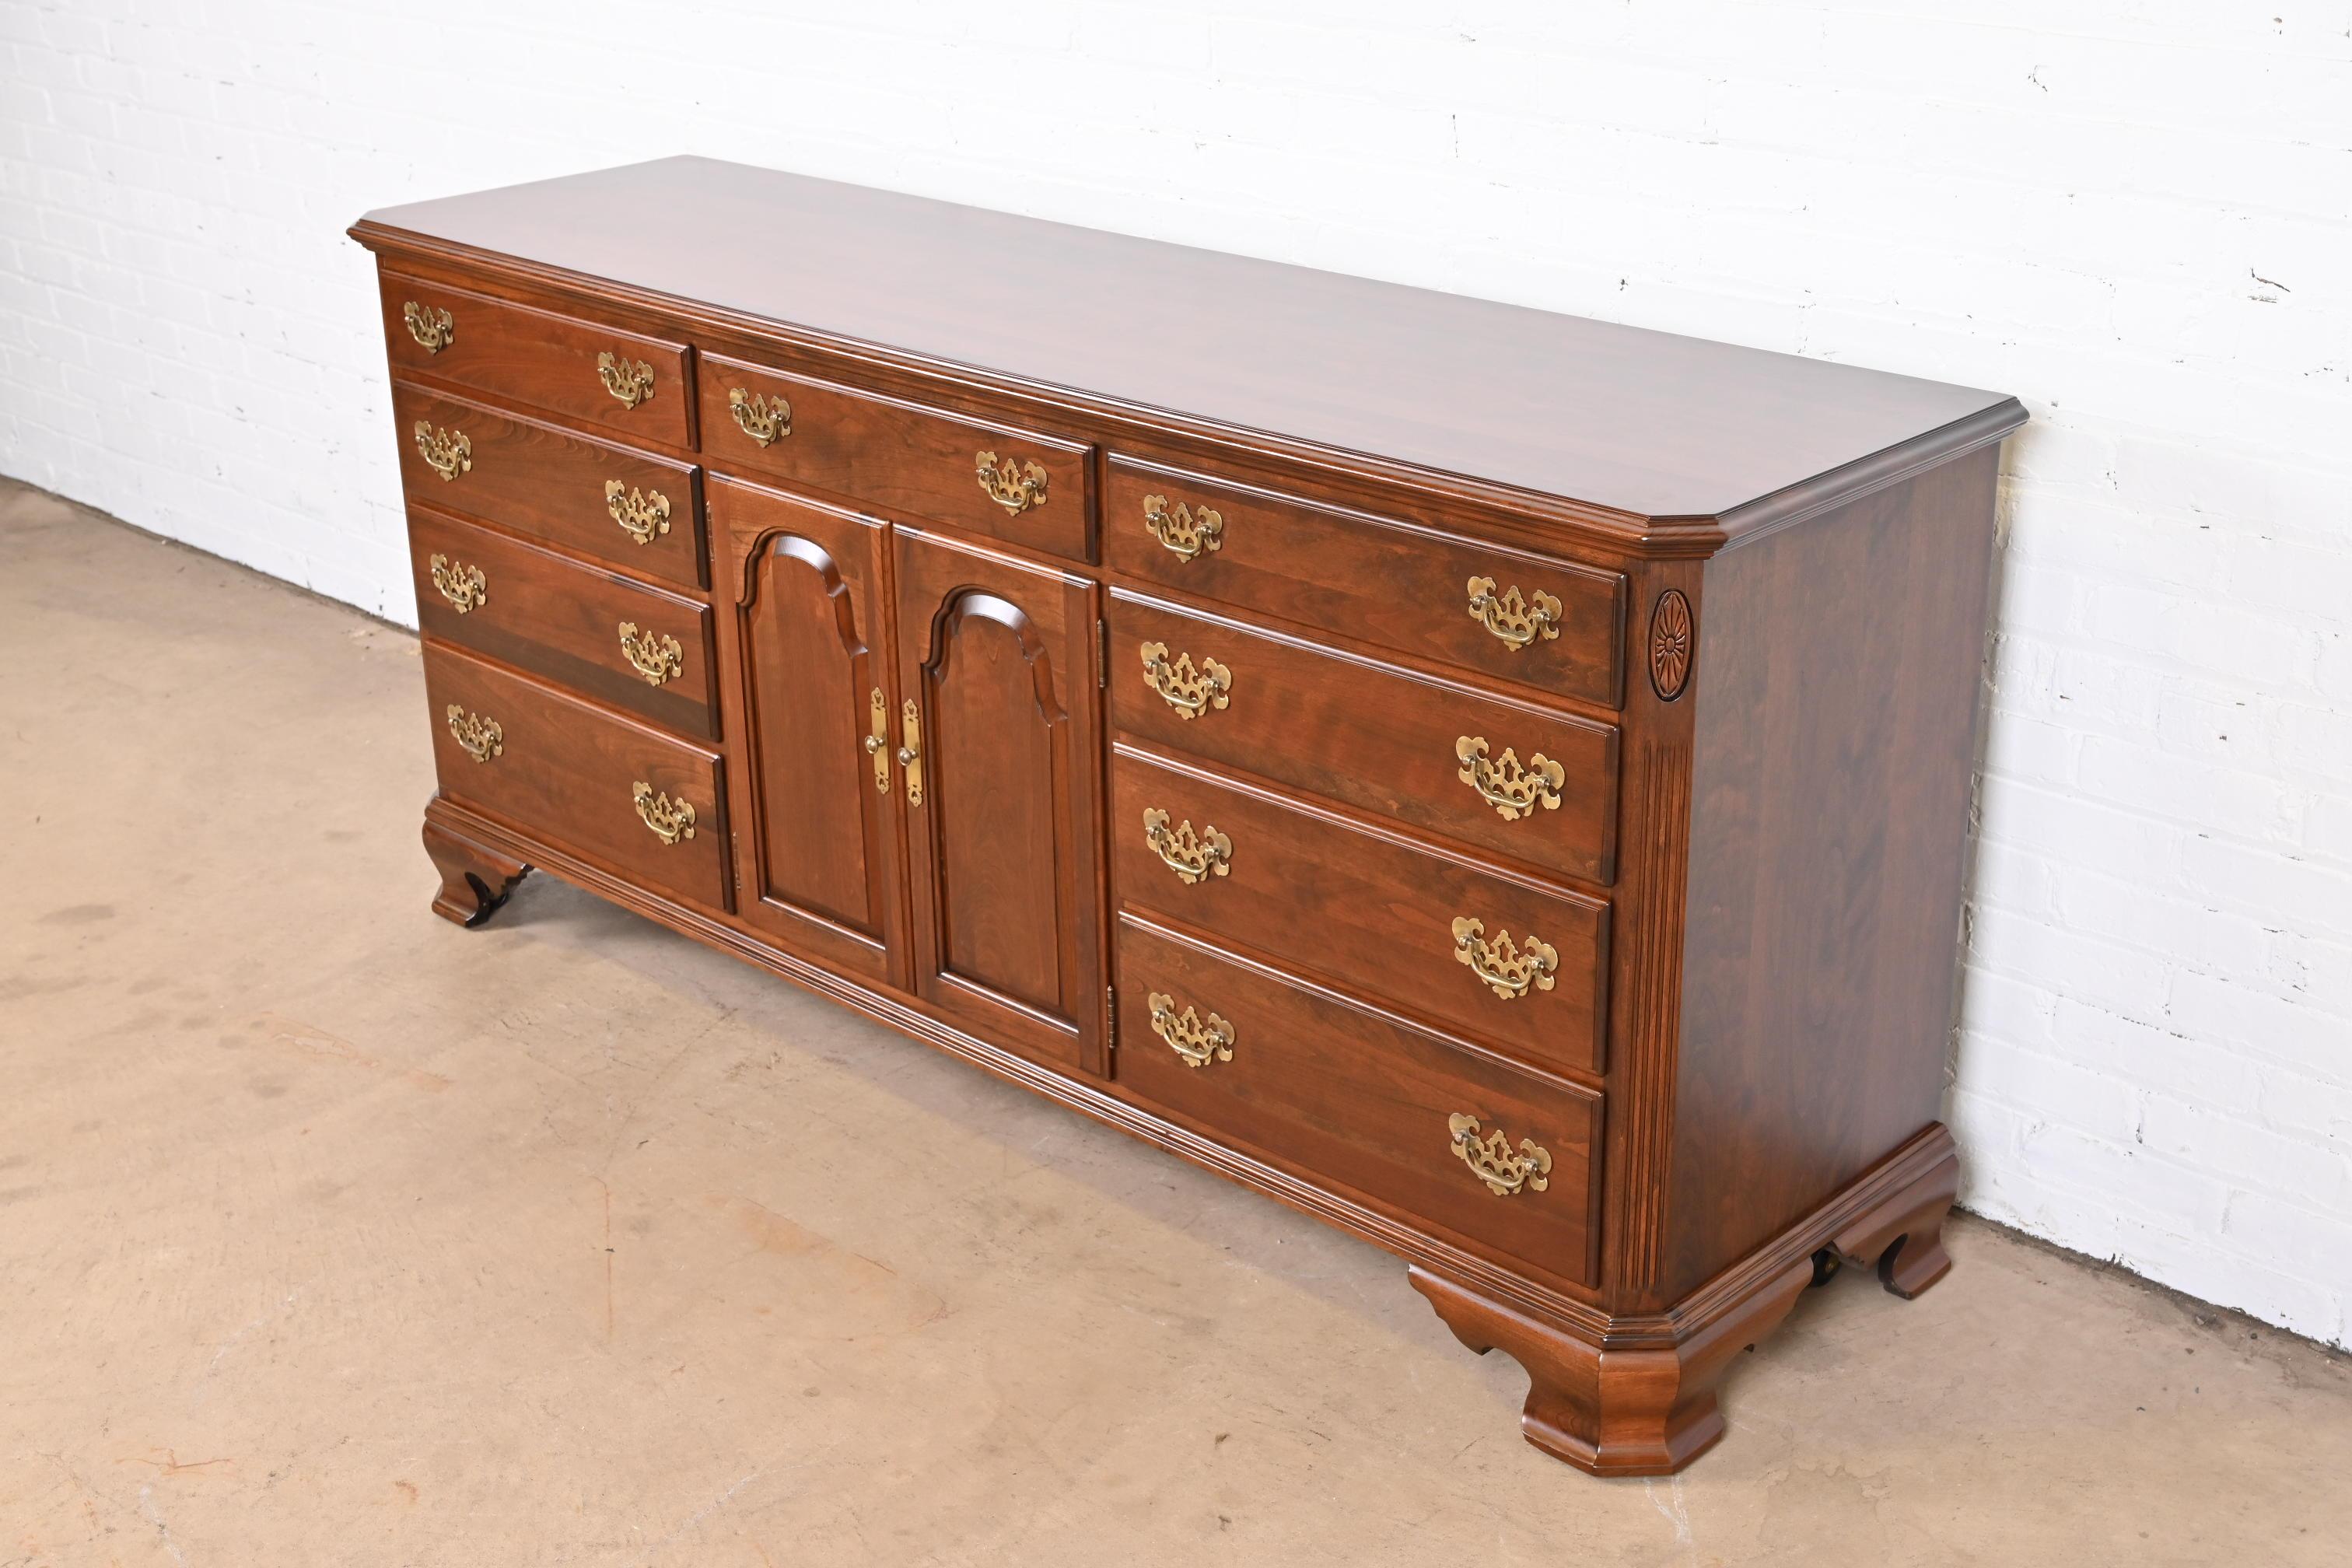 20th Century Ethan Allen Georgian Solid Cherry Wood Long Dresser, Newly Refinished